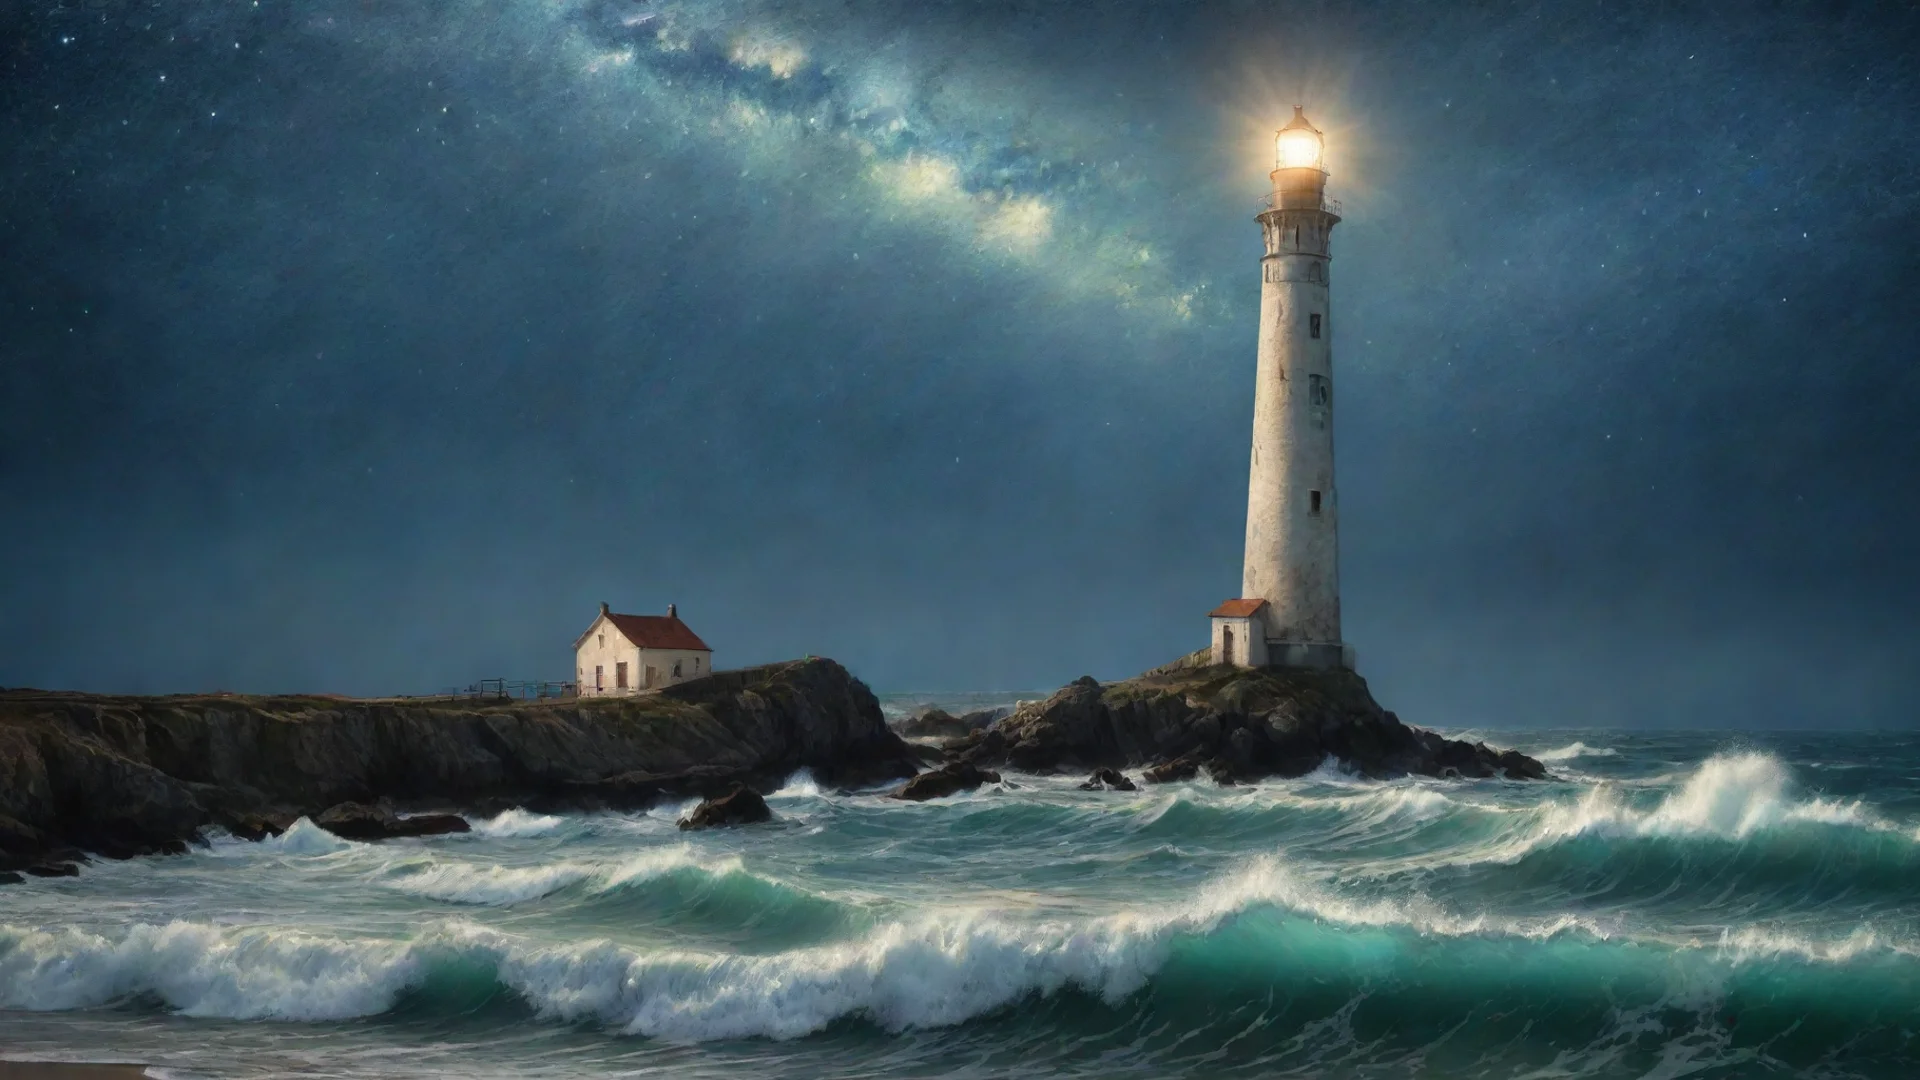 amazing dreamy lighthouse  dramatic lighting van gogh starry night magical atmosphere by renato muccillo a awesome portrait 2 wide